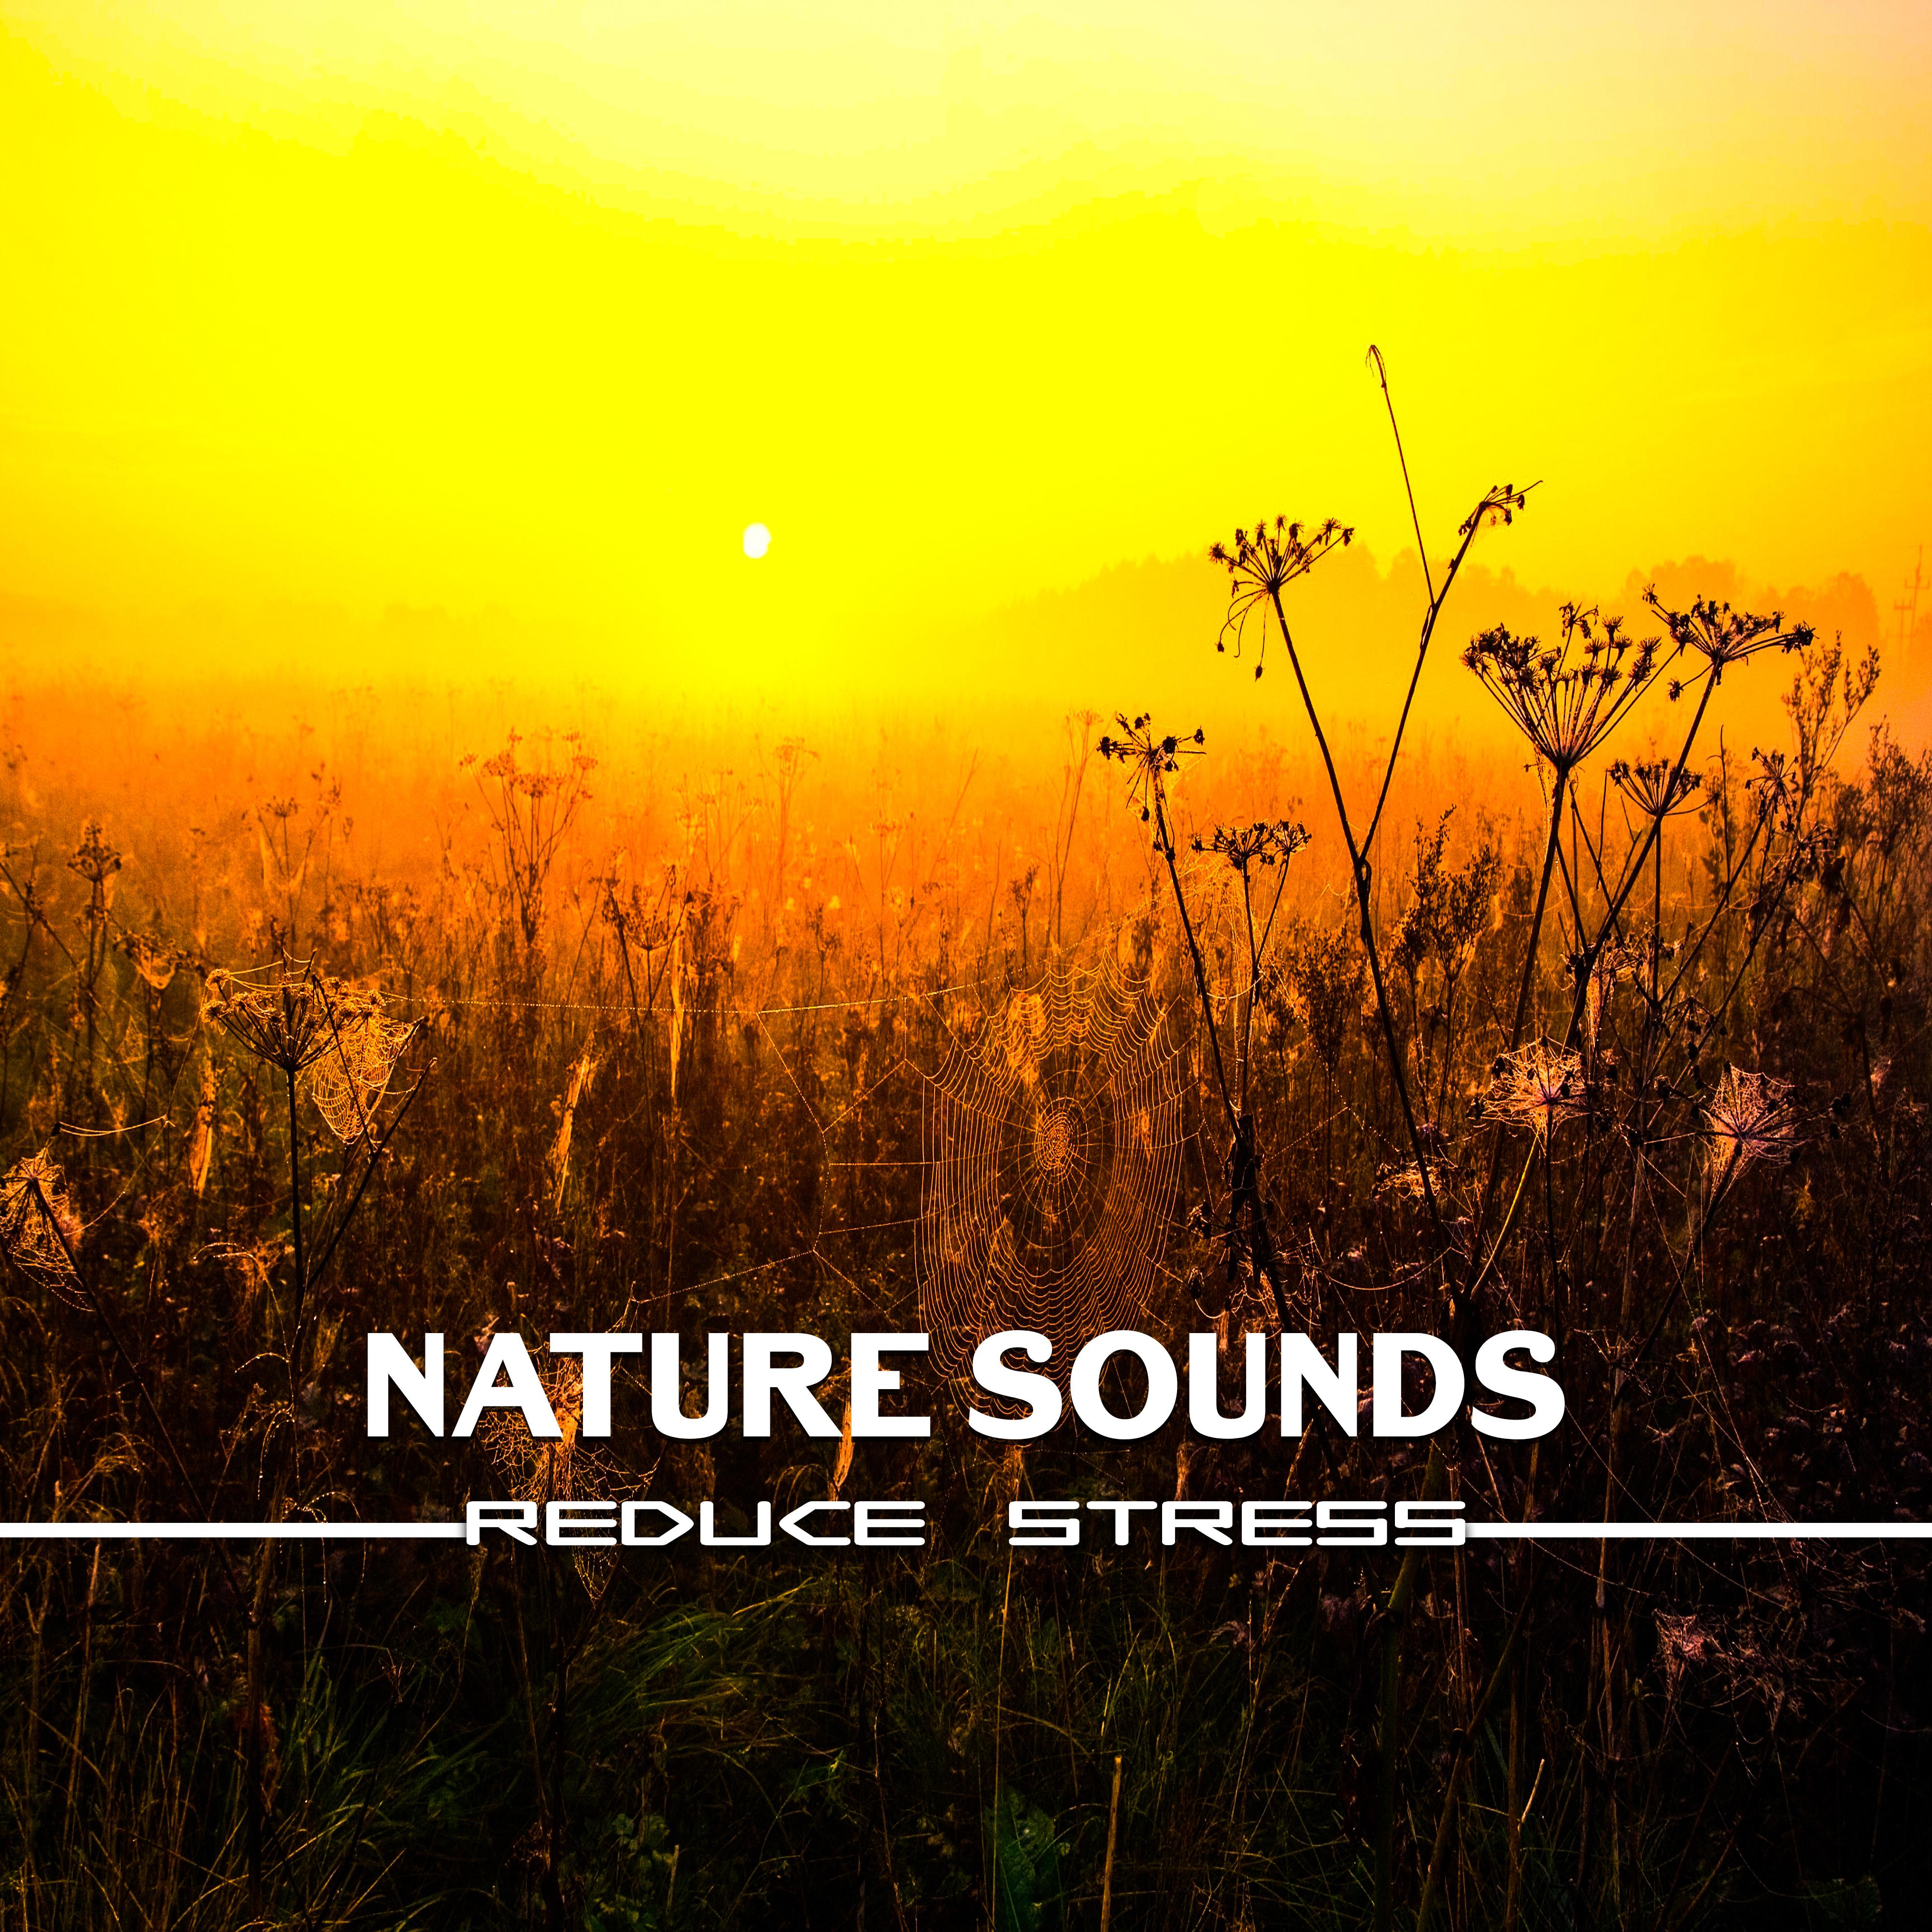 Nature Sounds Reduce Stress – Inner Healing, Tranquility, Soft Music to Calm Down, Relaxation, Stress Relief, Peaceful Mind